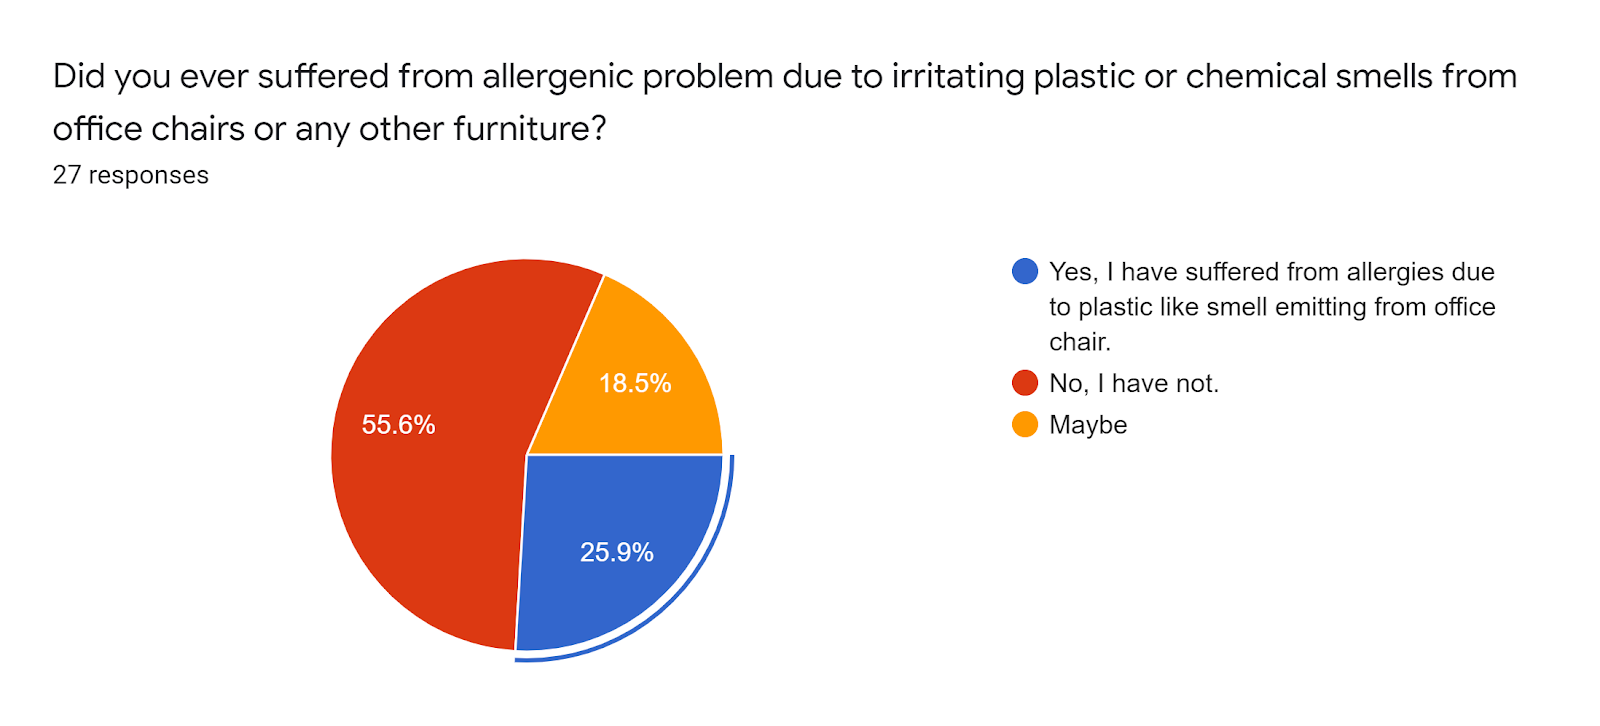 Forms response chart. Question title: Did you ever suffered from allergenic problem due to irritating plastic or chemical smells from office chairs or any other furniture?. Number of responses: 27 responses.